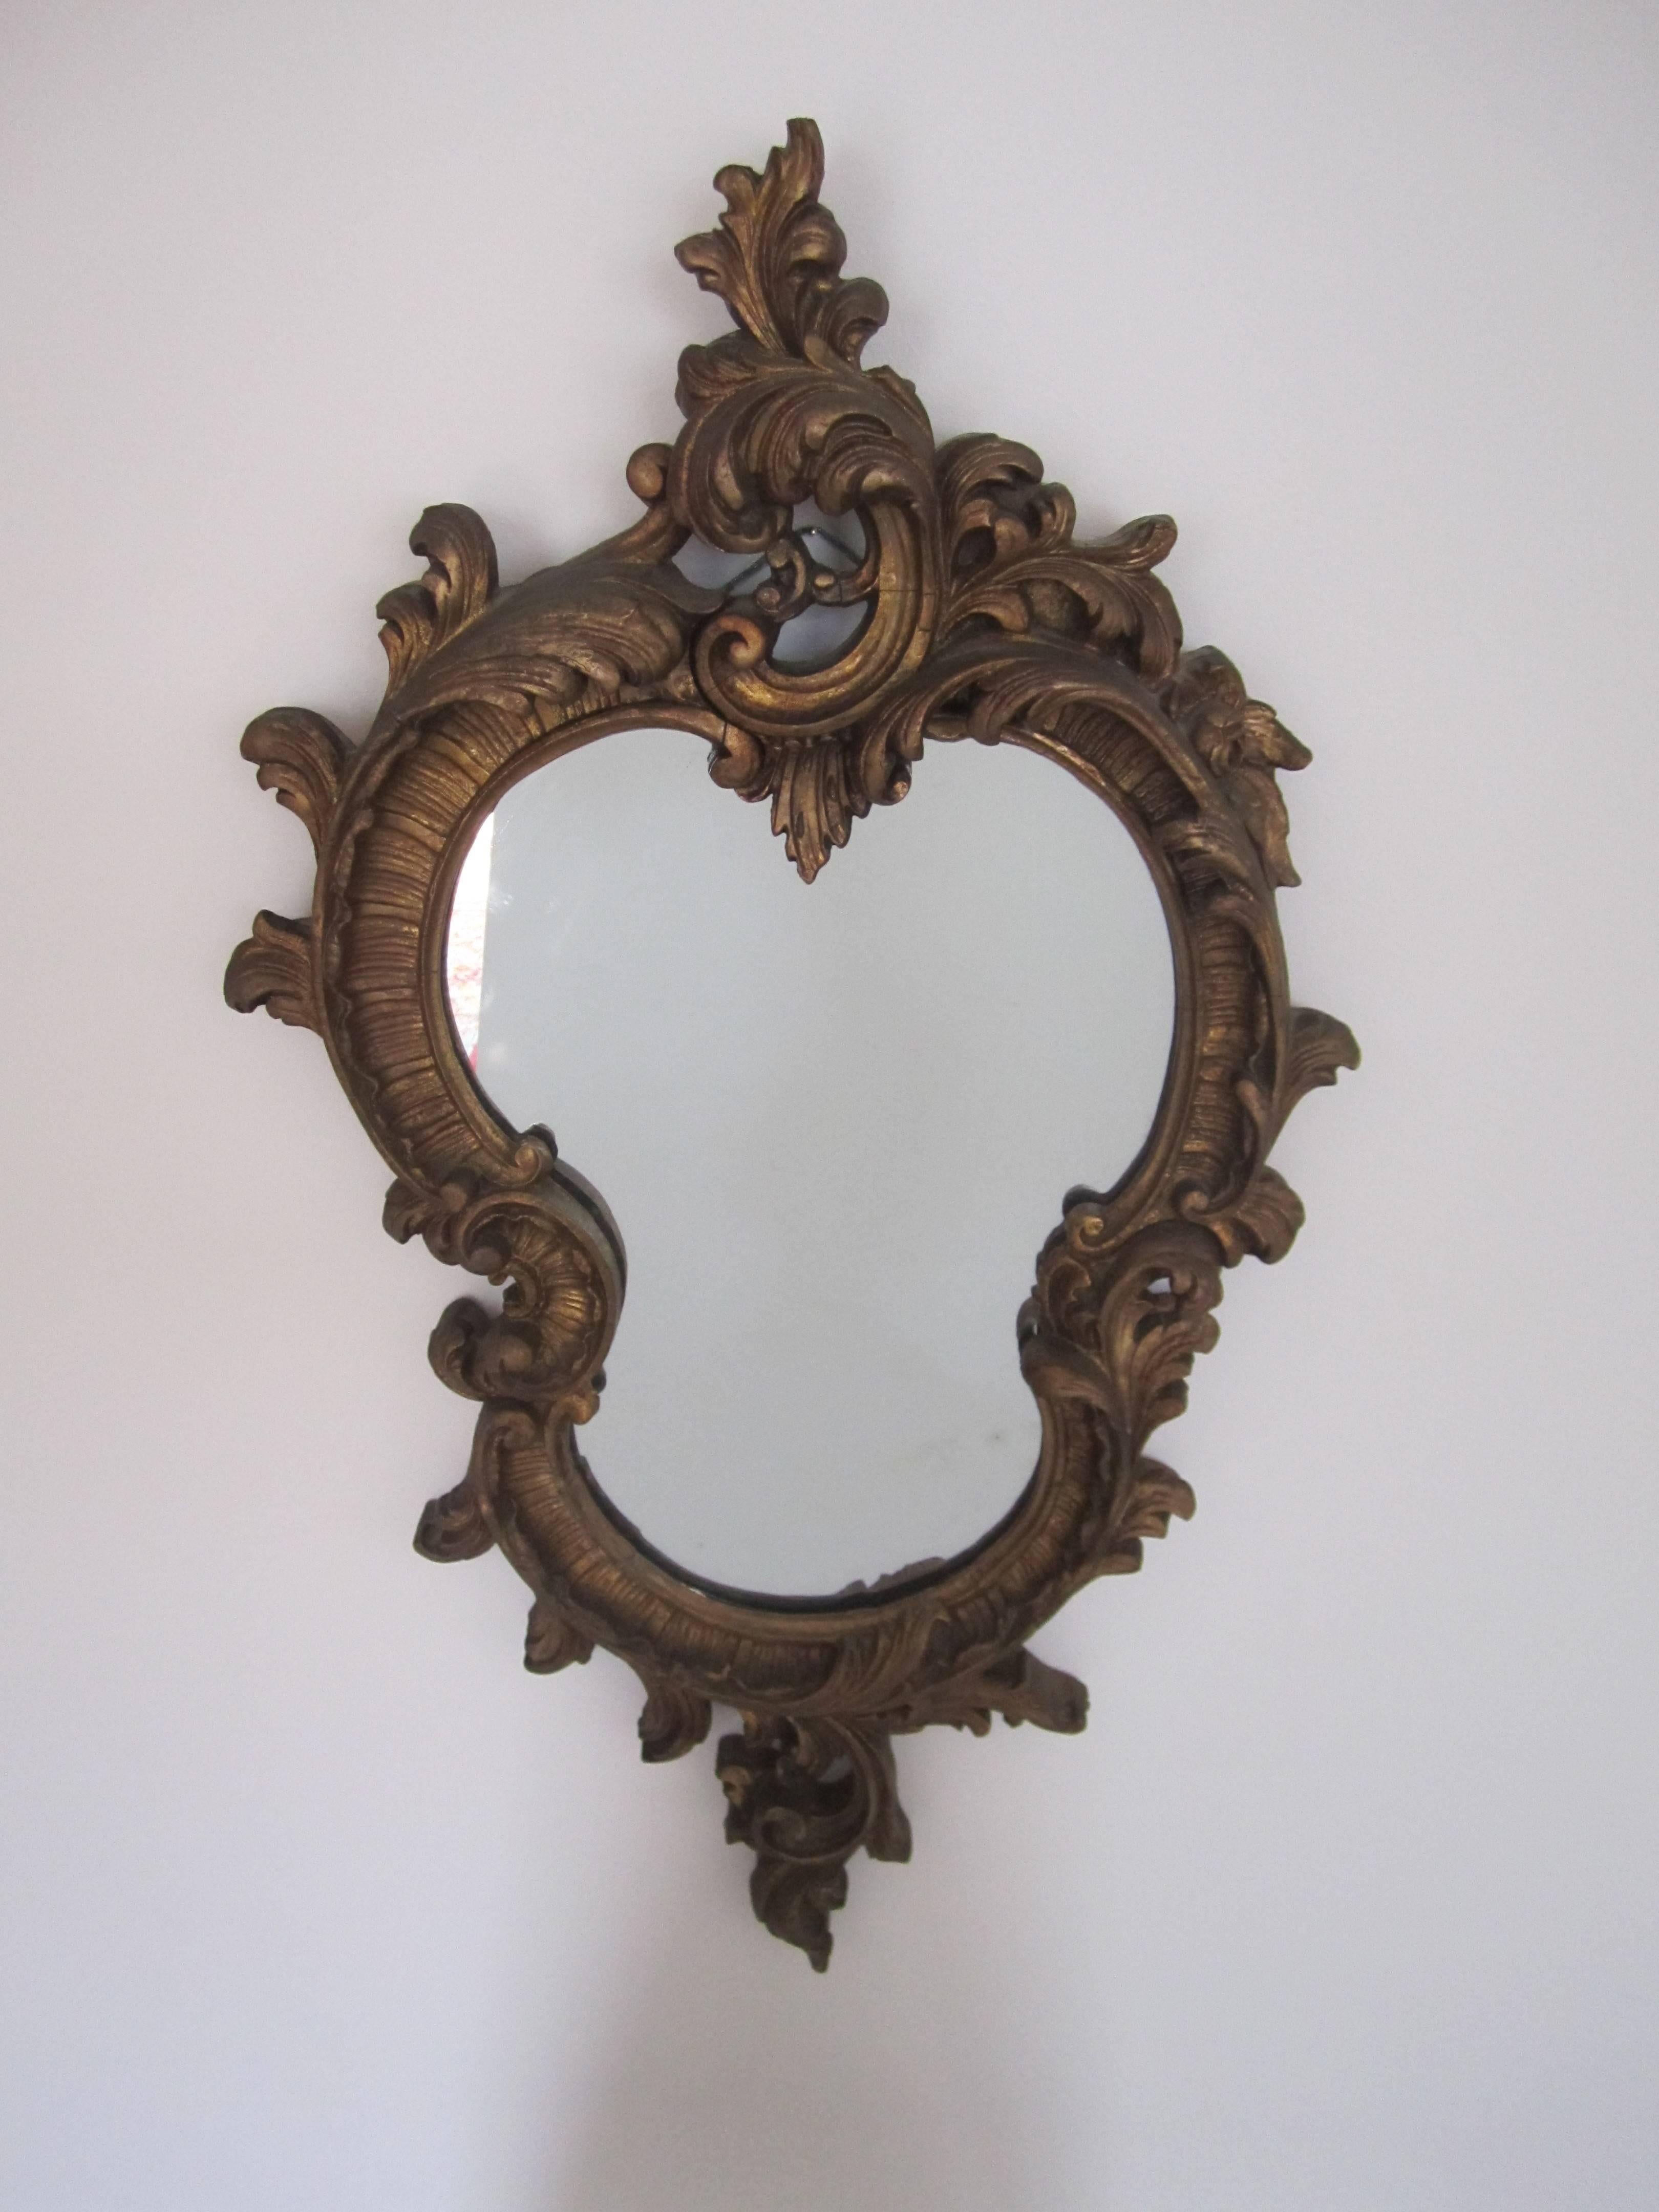 A beautiful Italian vintage carved giltwood wall mirror in the Baroque style, circa Midcentury - Late 20th Century.

Measurements include: 31